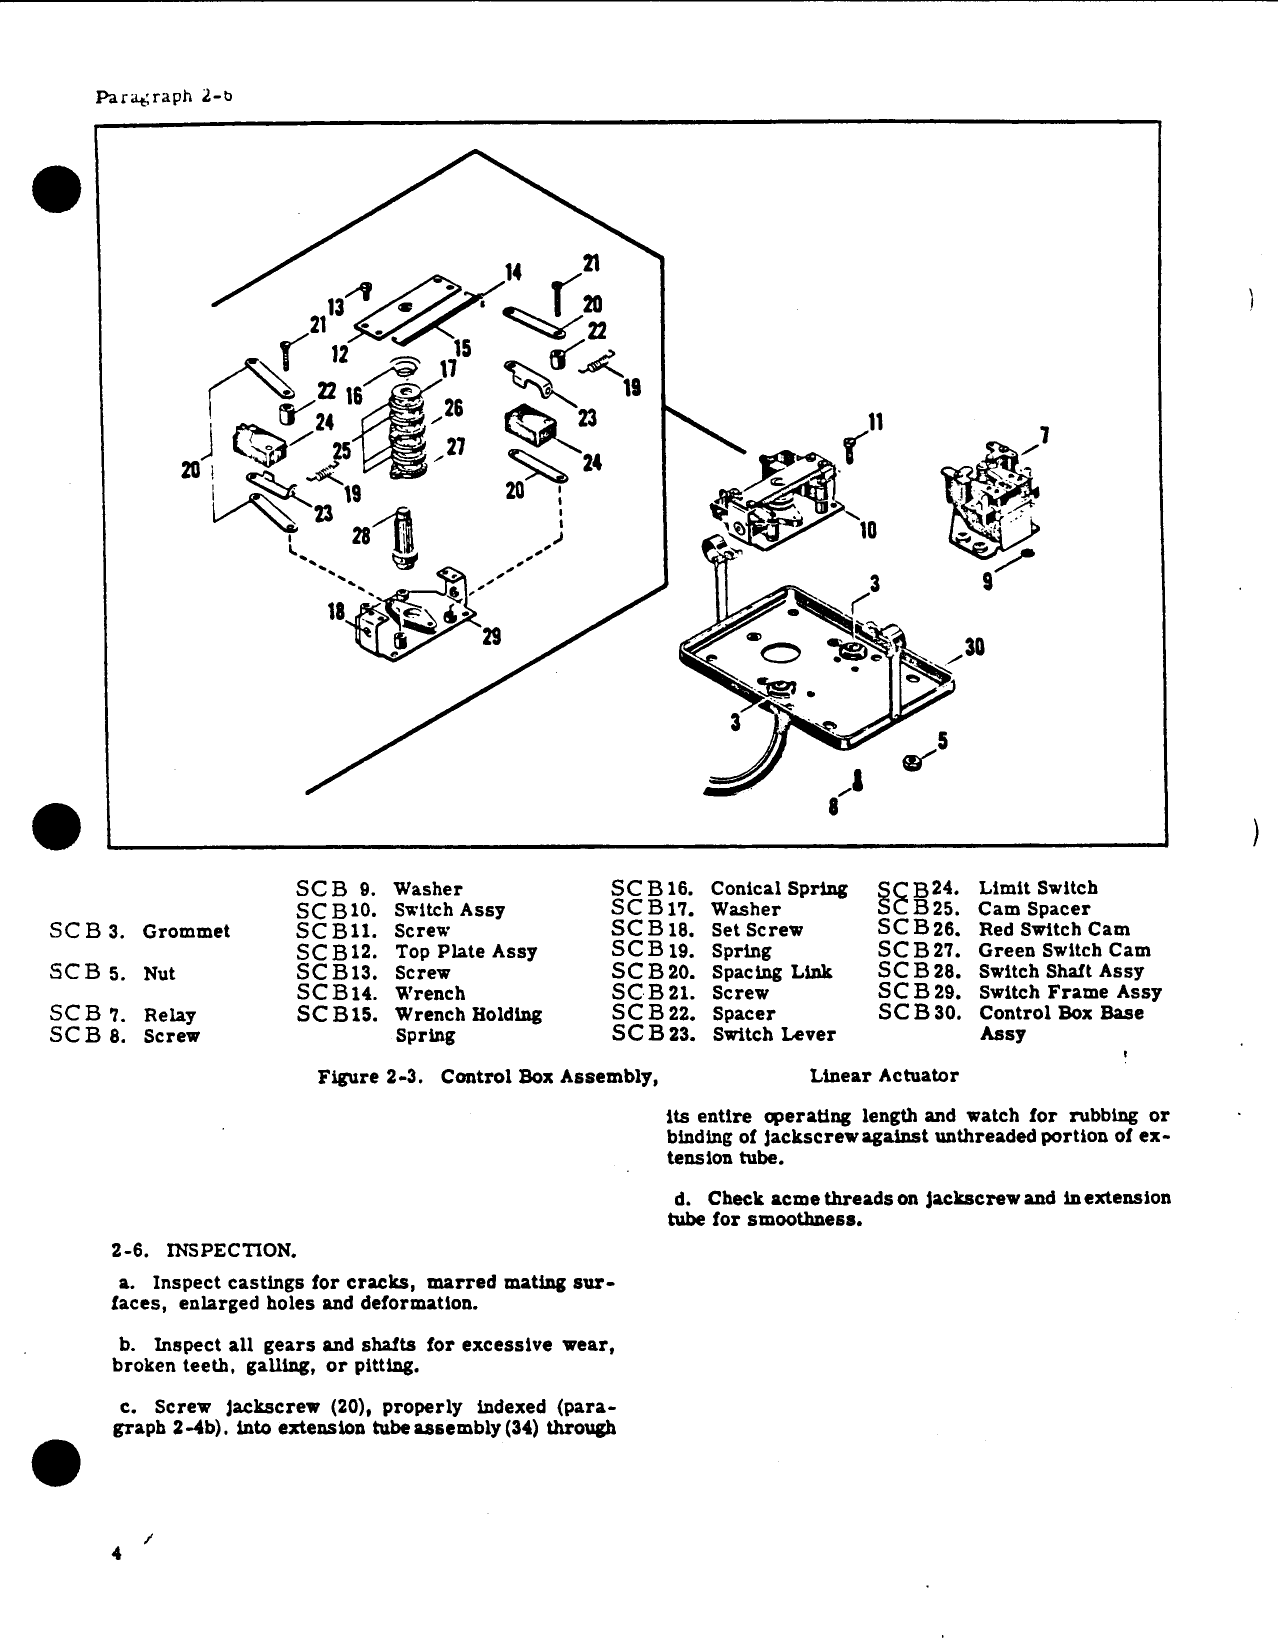 Sample page 5 from AirCorps Library document: Overhaul Inst. with Illustrated Parts Catalog for Actuator 1-2157-1M1 and 4859